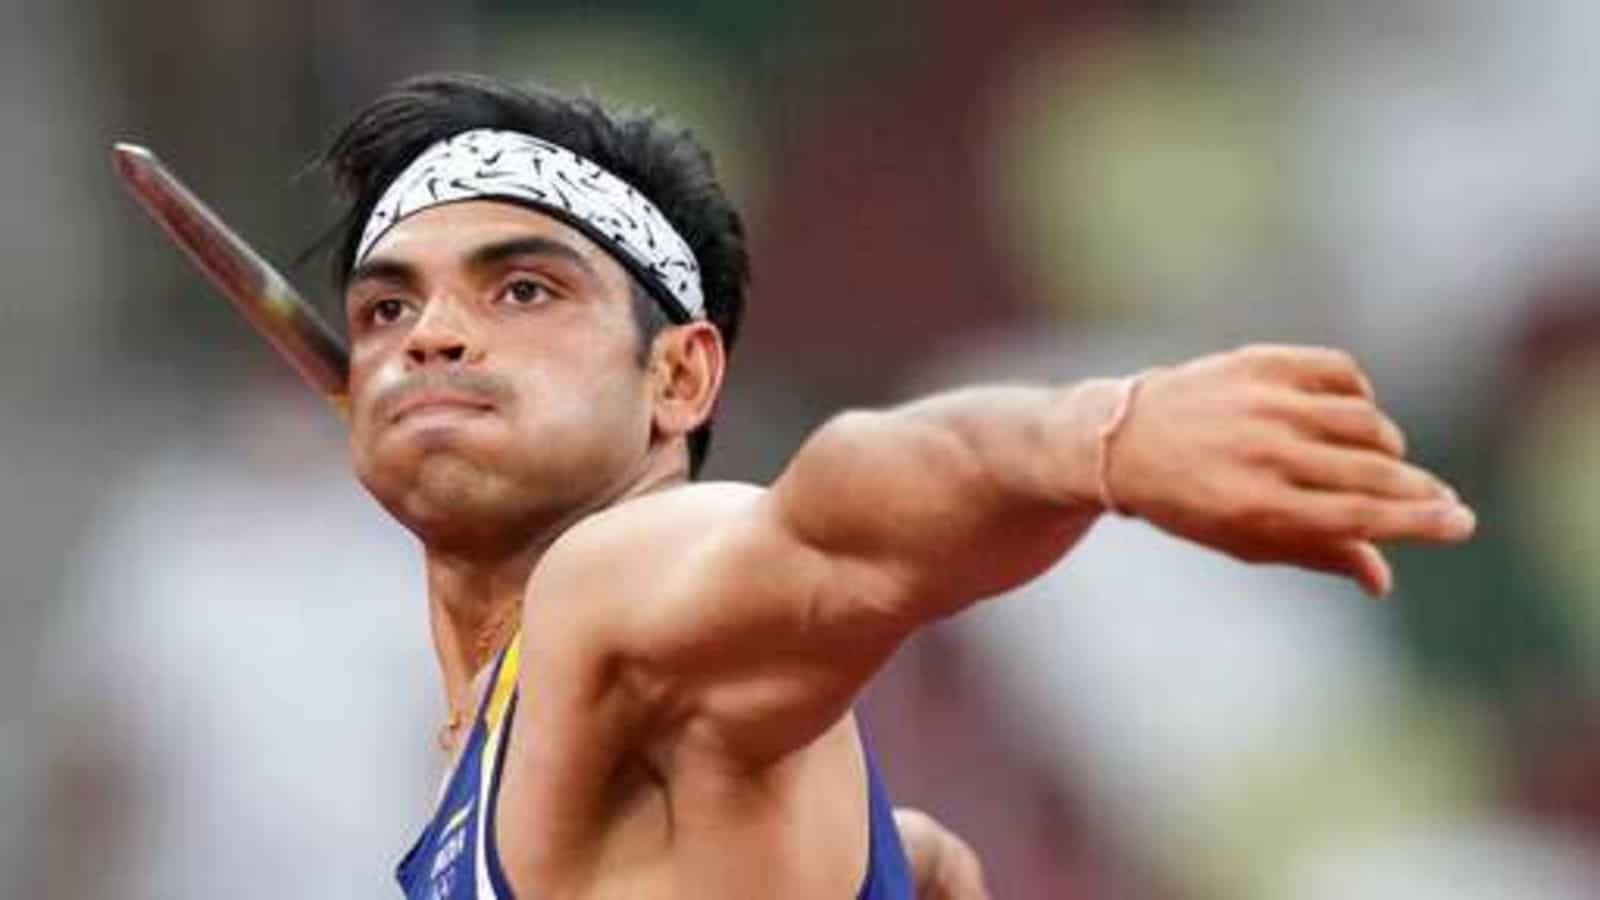 History has been scripted!' PM Modi lauds Neeraj Chopra on Olympic gold medal